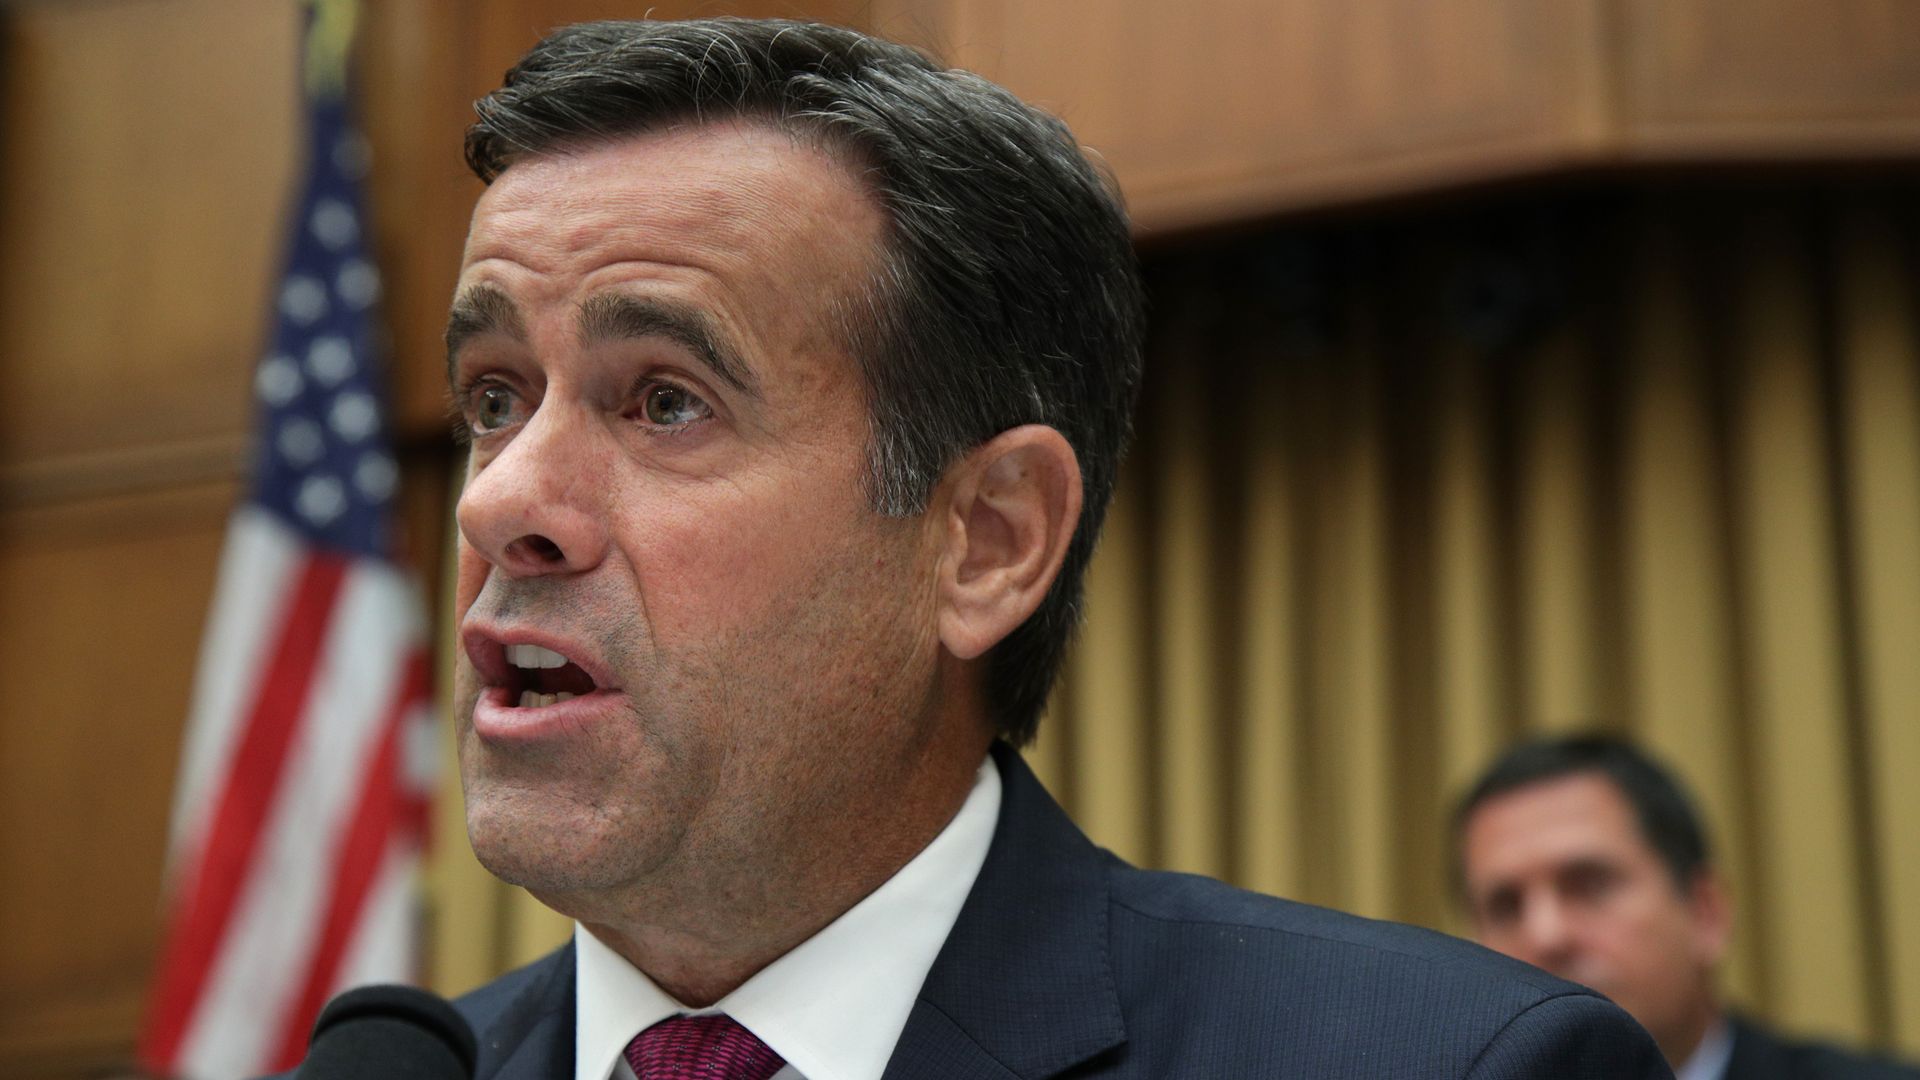 This image shows Ratcliffe speaking while wearing a suit at a hearing.